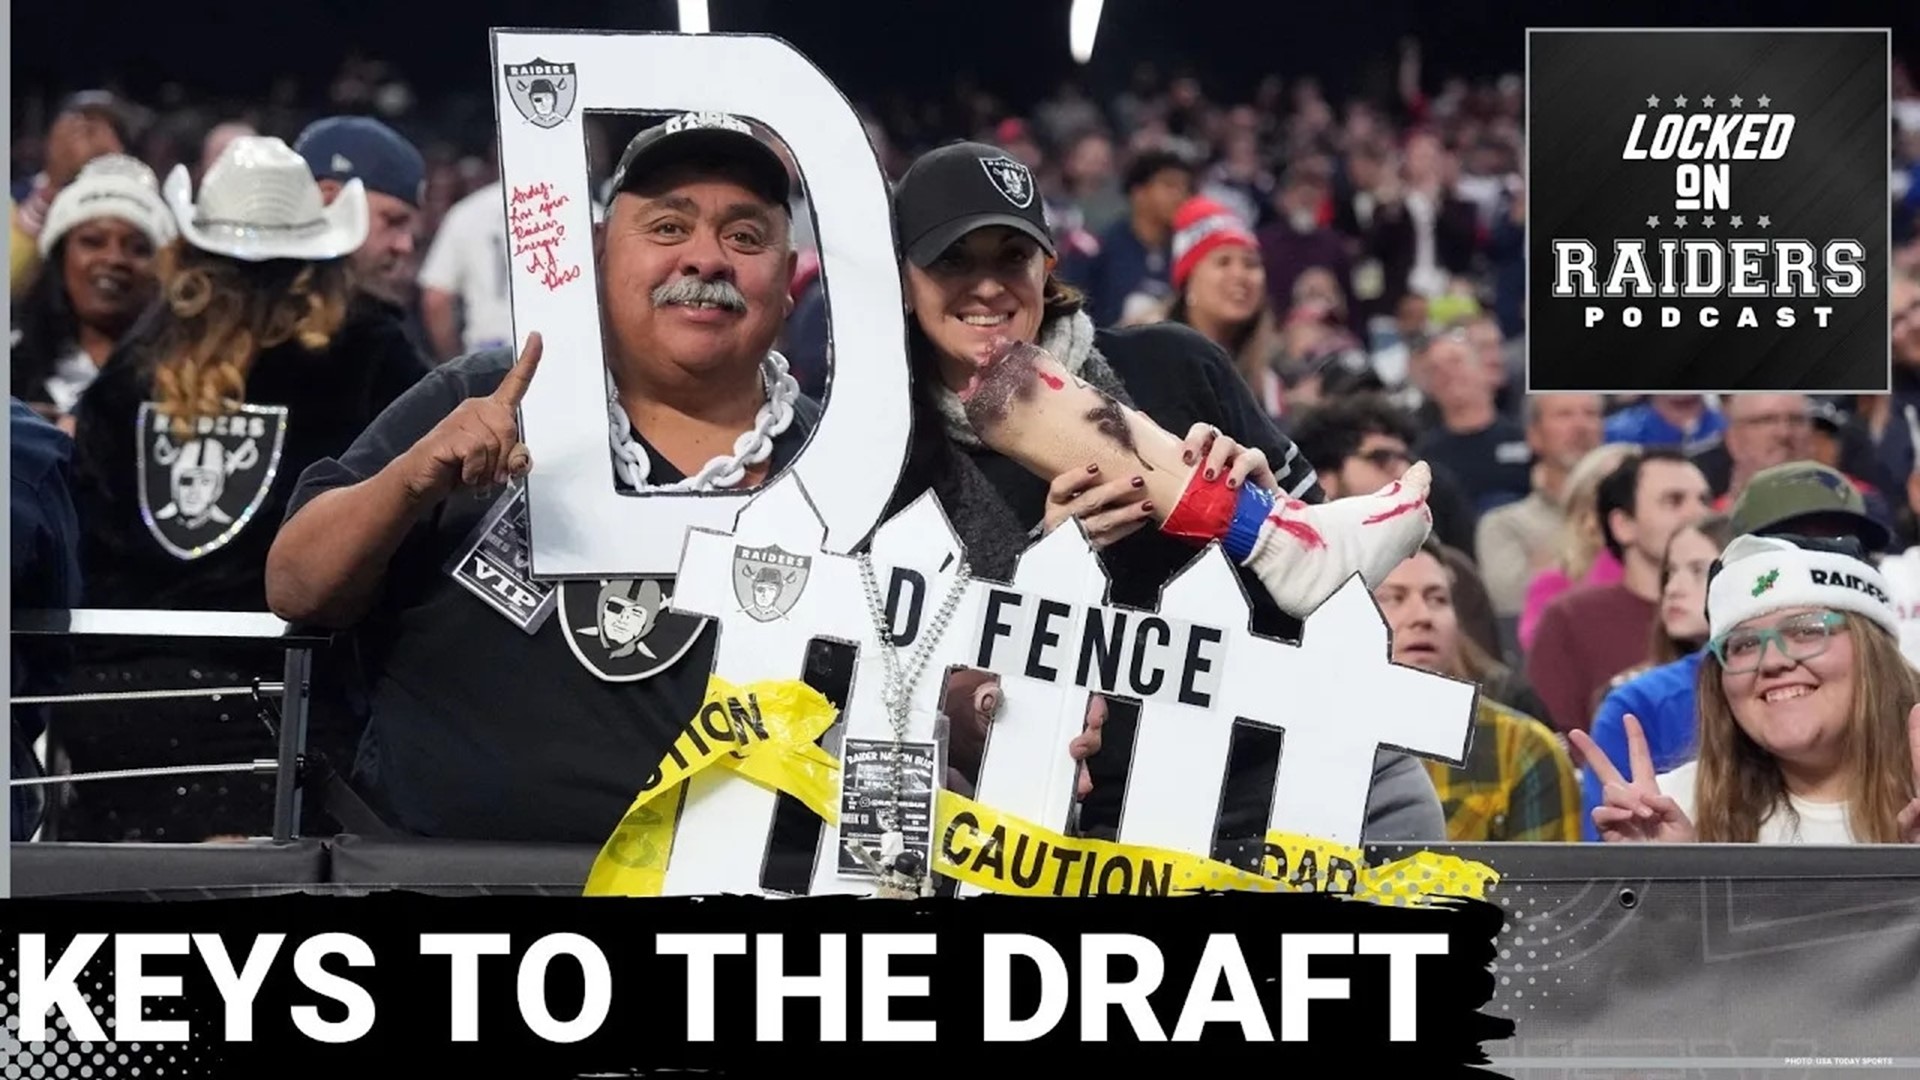 5 things that would make me feel good about the Raiders upcoming draft class when it's all said and done.